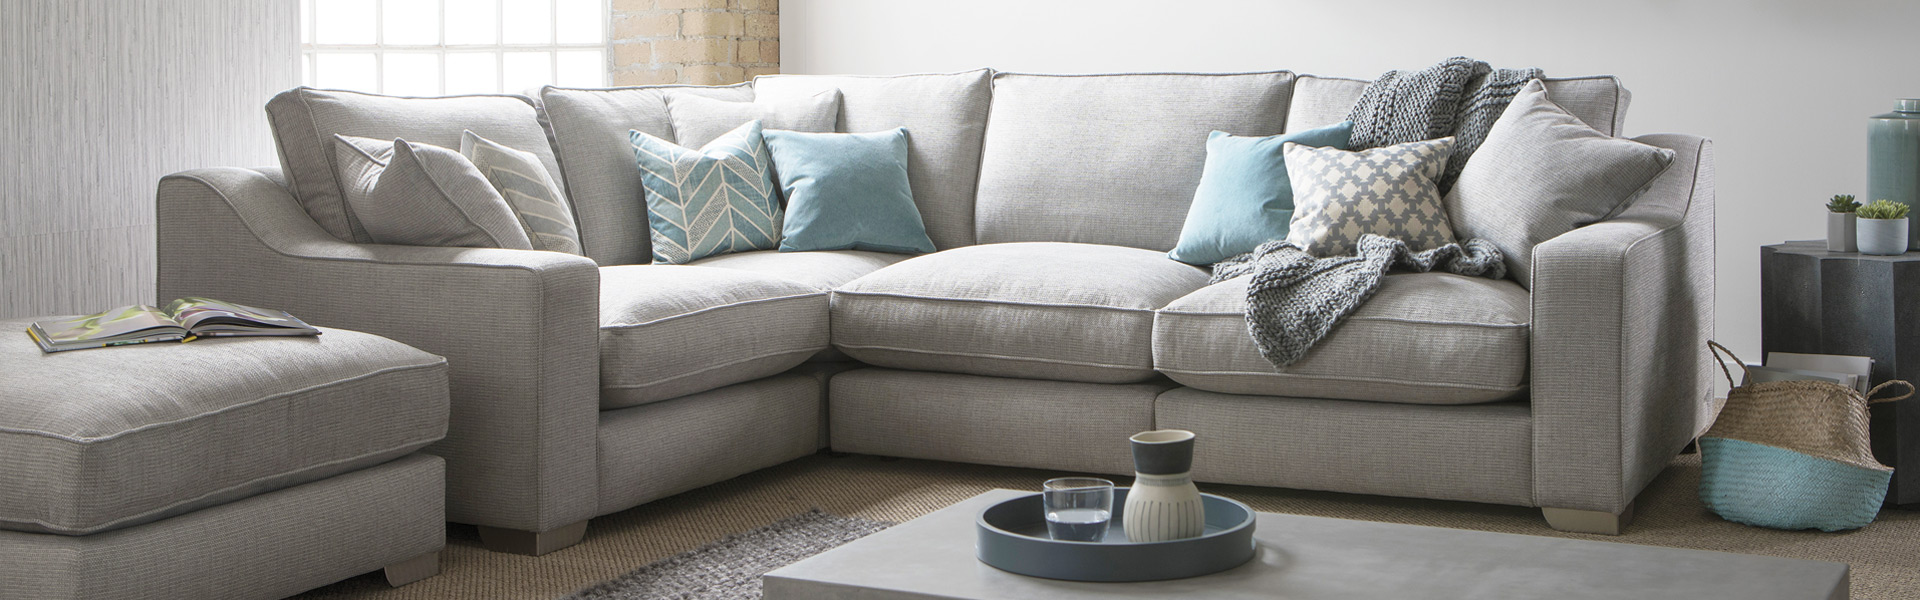 Explore the stylish sofas for your home